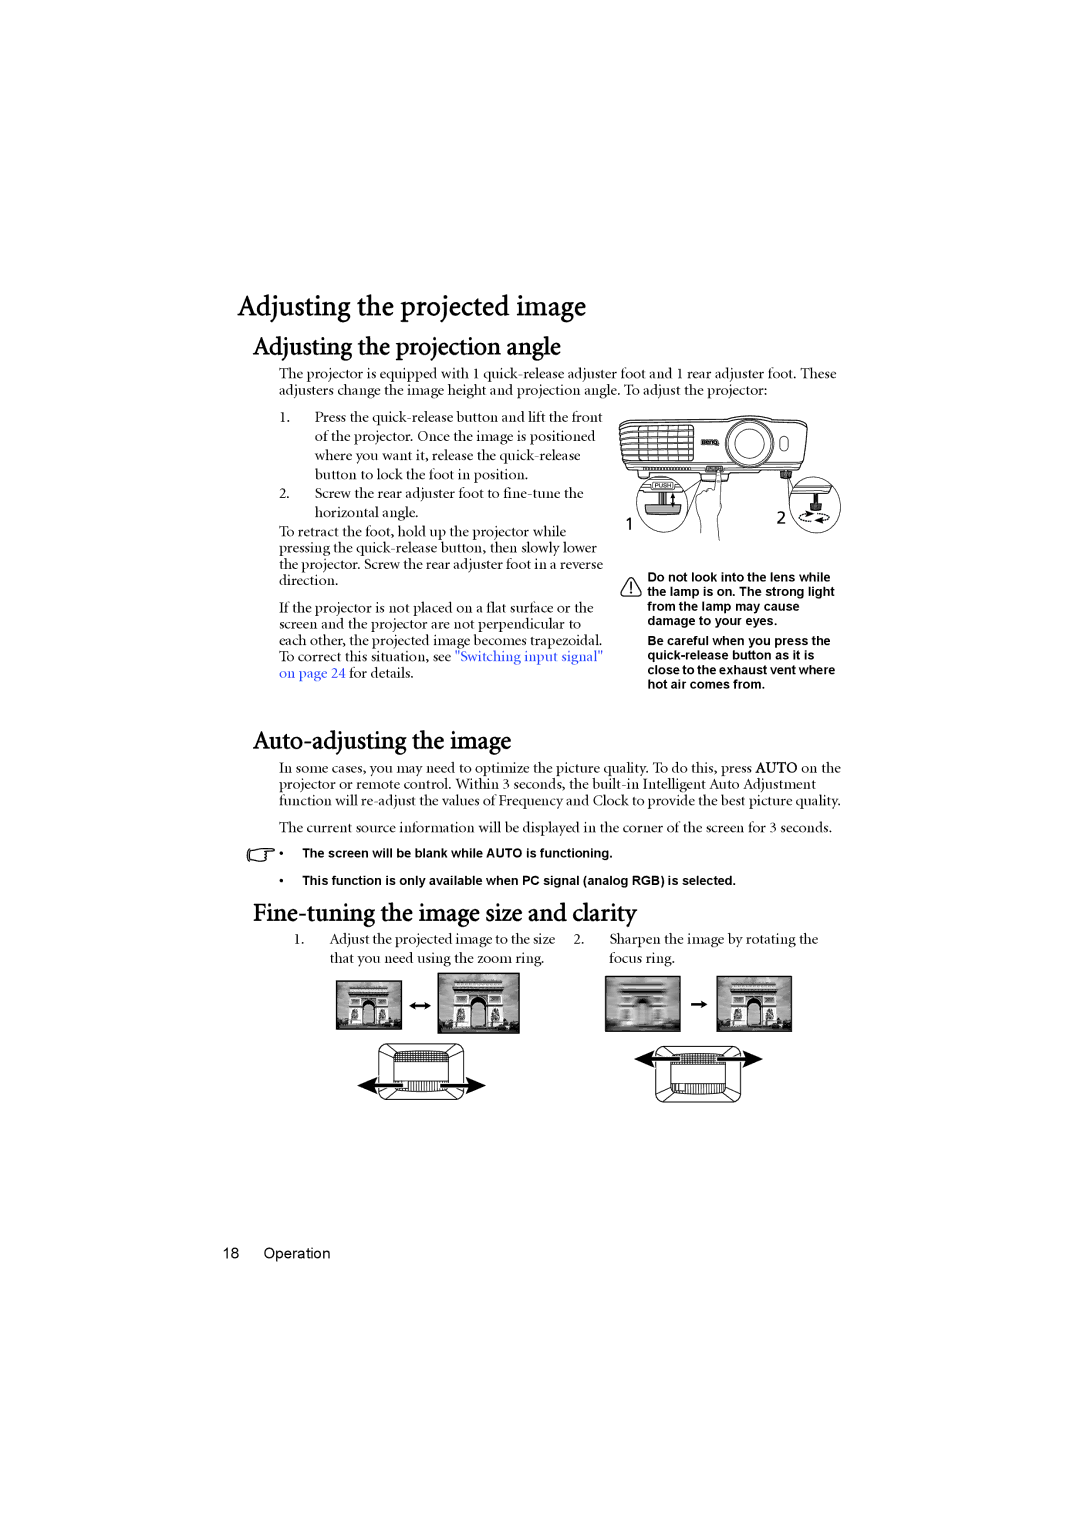 BenQ MX615, MS614 user manual Adjusting the projected image, Adjusting the projection angle, Auto-adjusting the image 